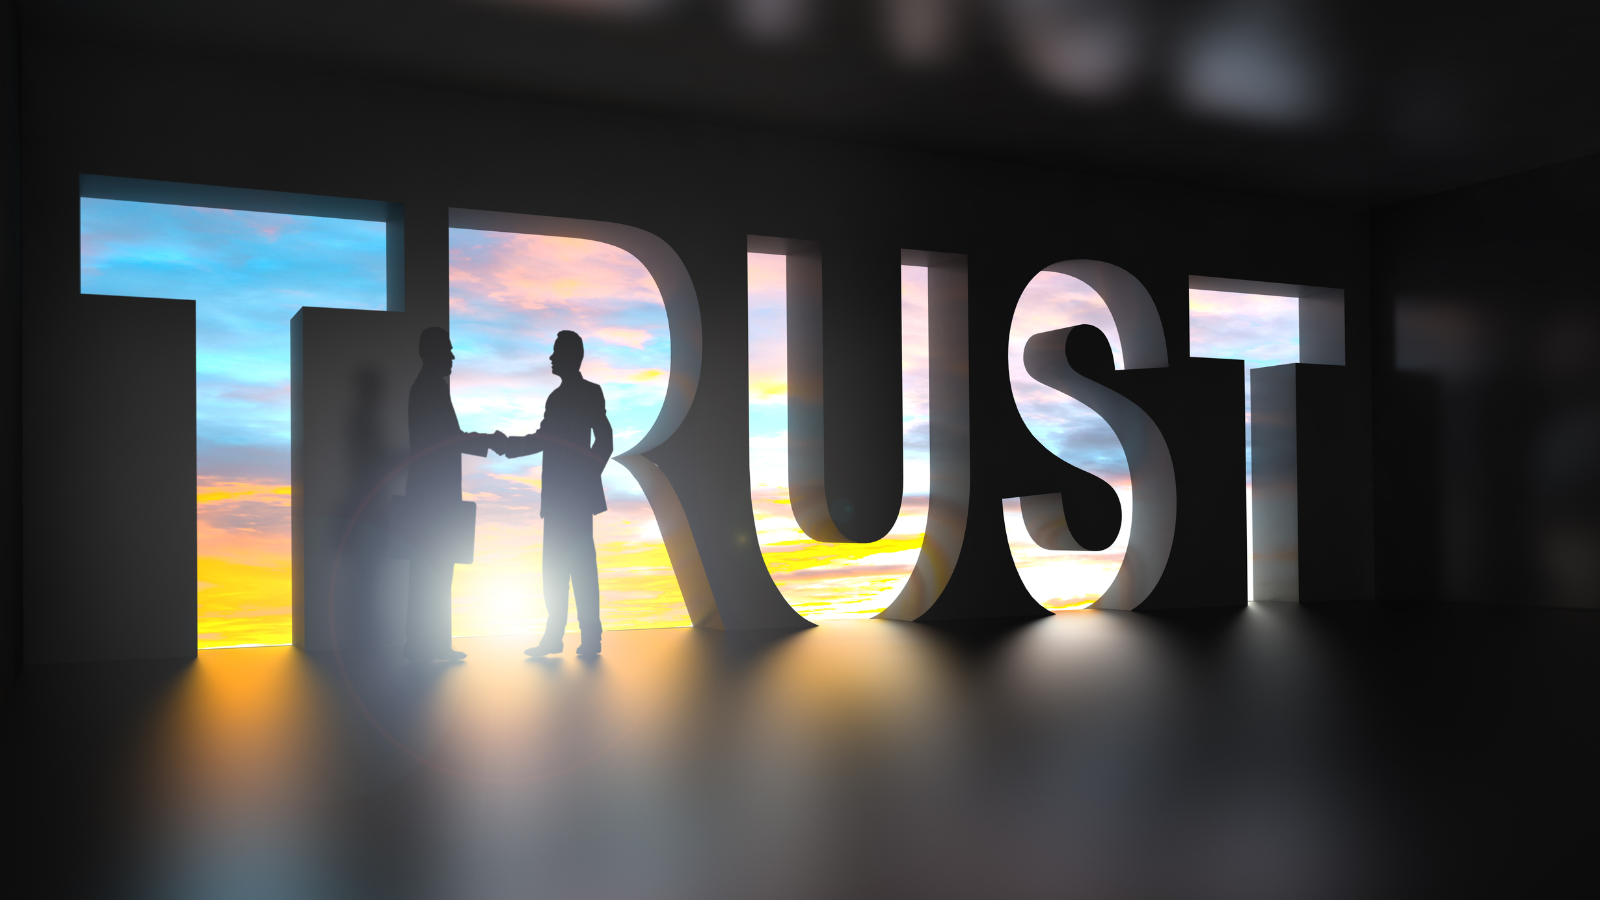 How to Build a More Trusting Culture